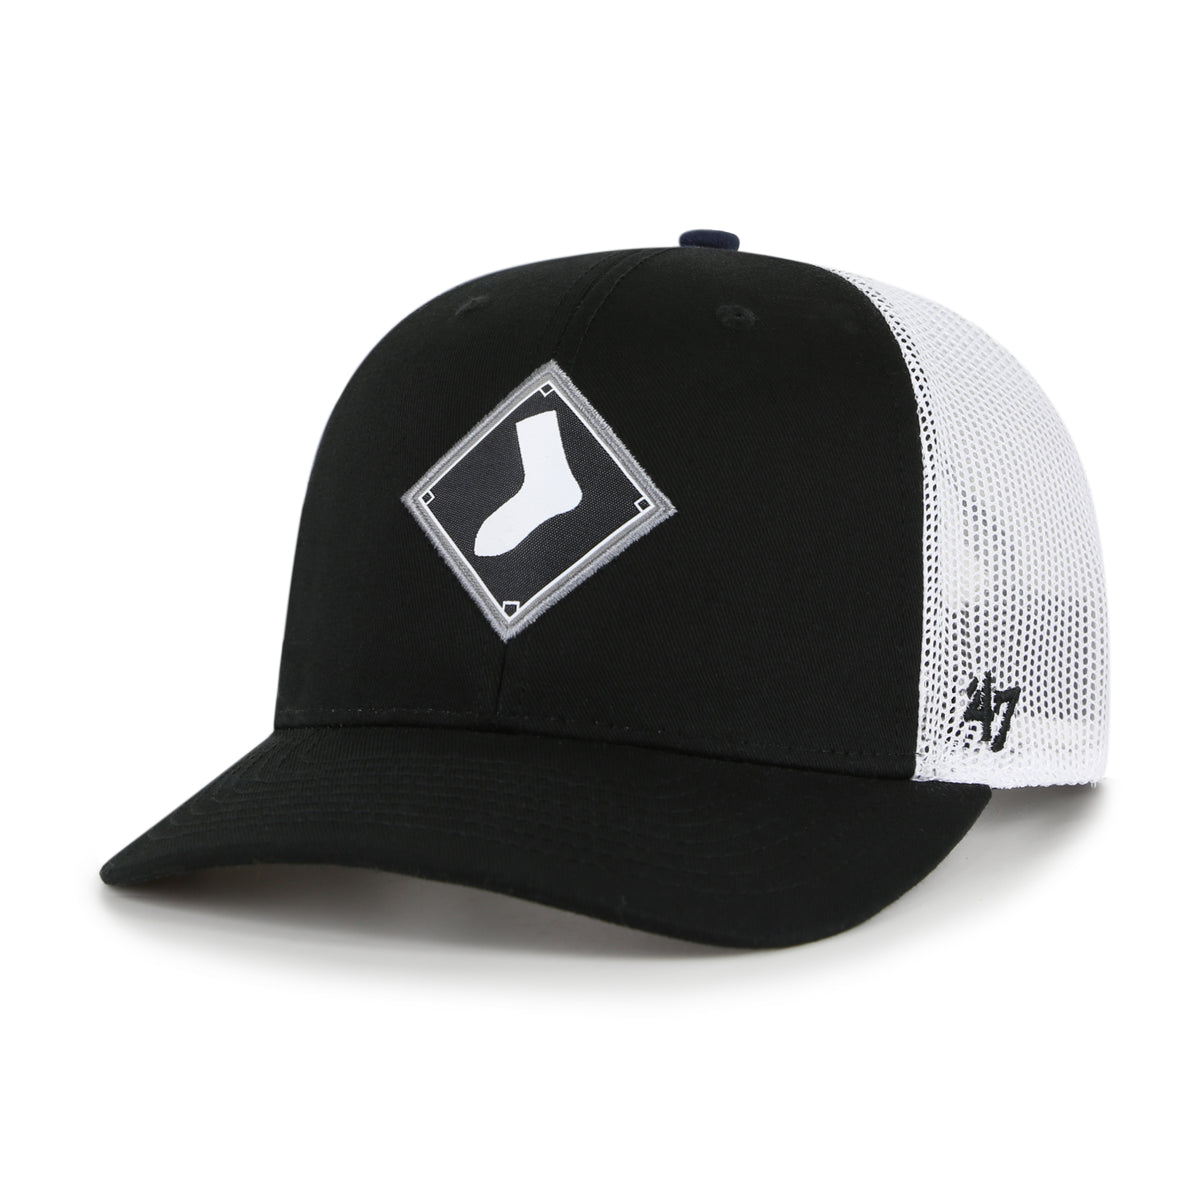 CHICAGO WHITE SOX CITY CONNECT '47 TRUCKER